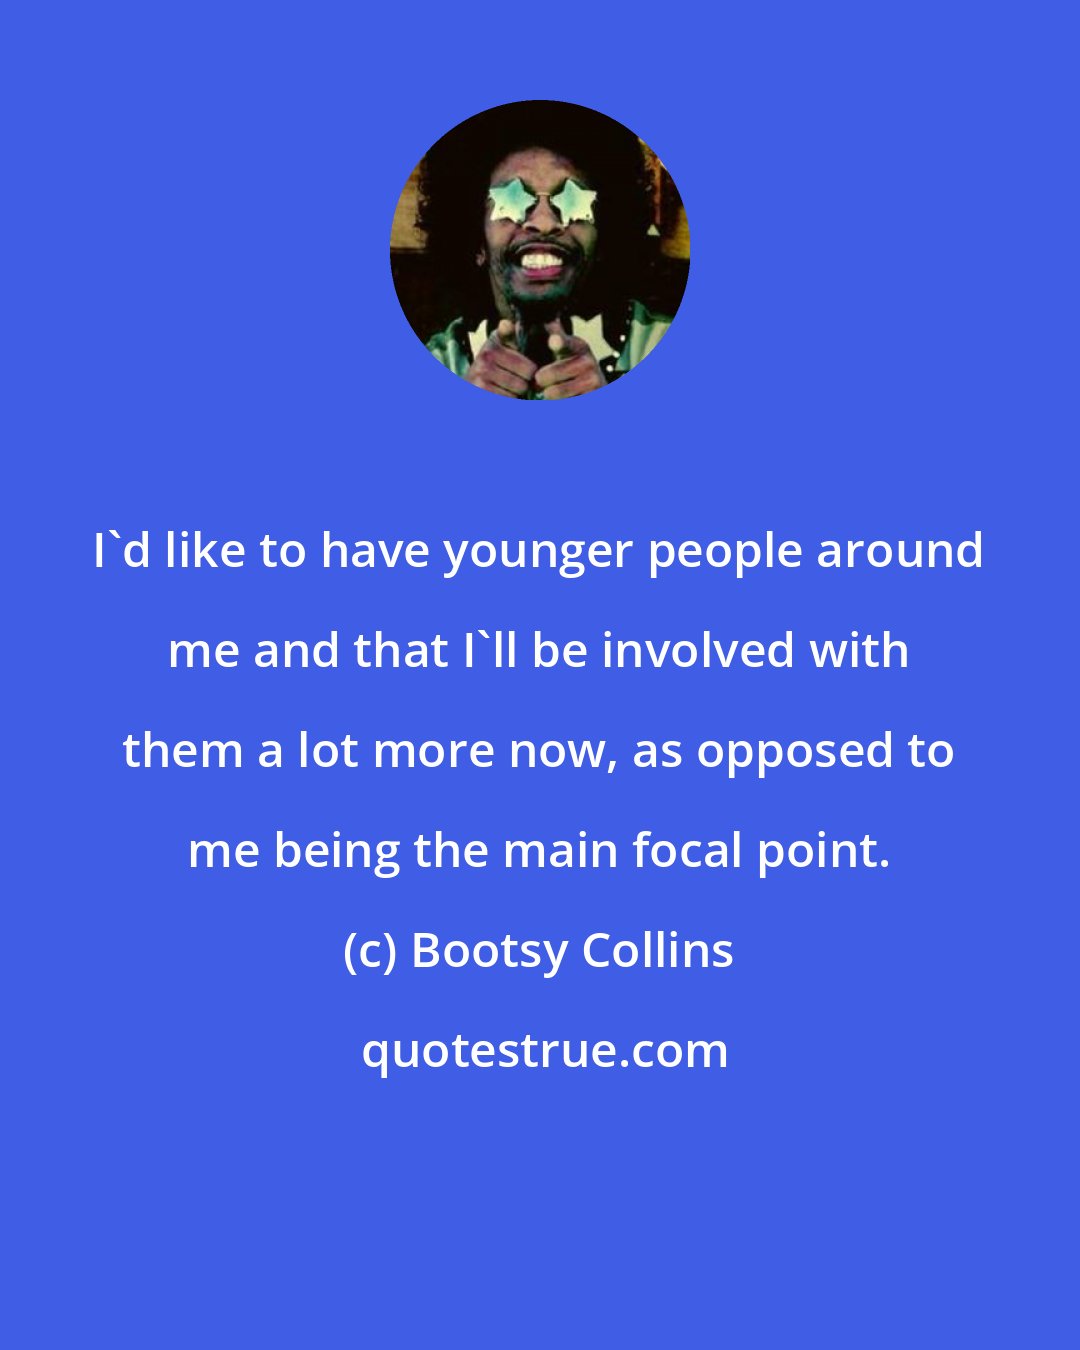 Bootsy Collins: I'd like to have younger people around me and that I'll be involved with them a lot more now, as opposed to me being the main focal point.